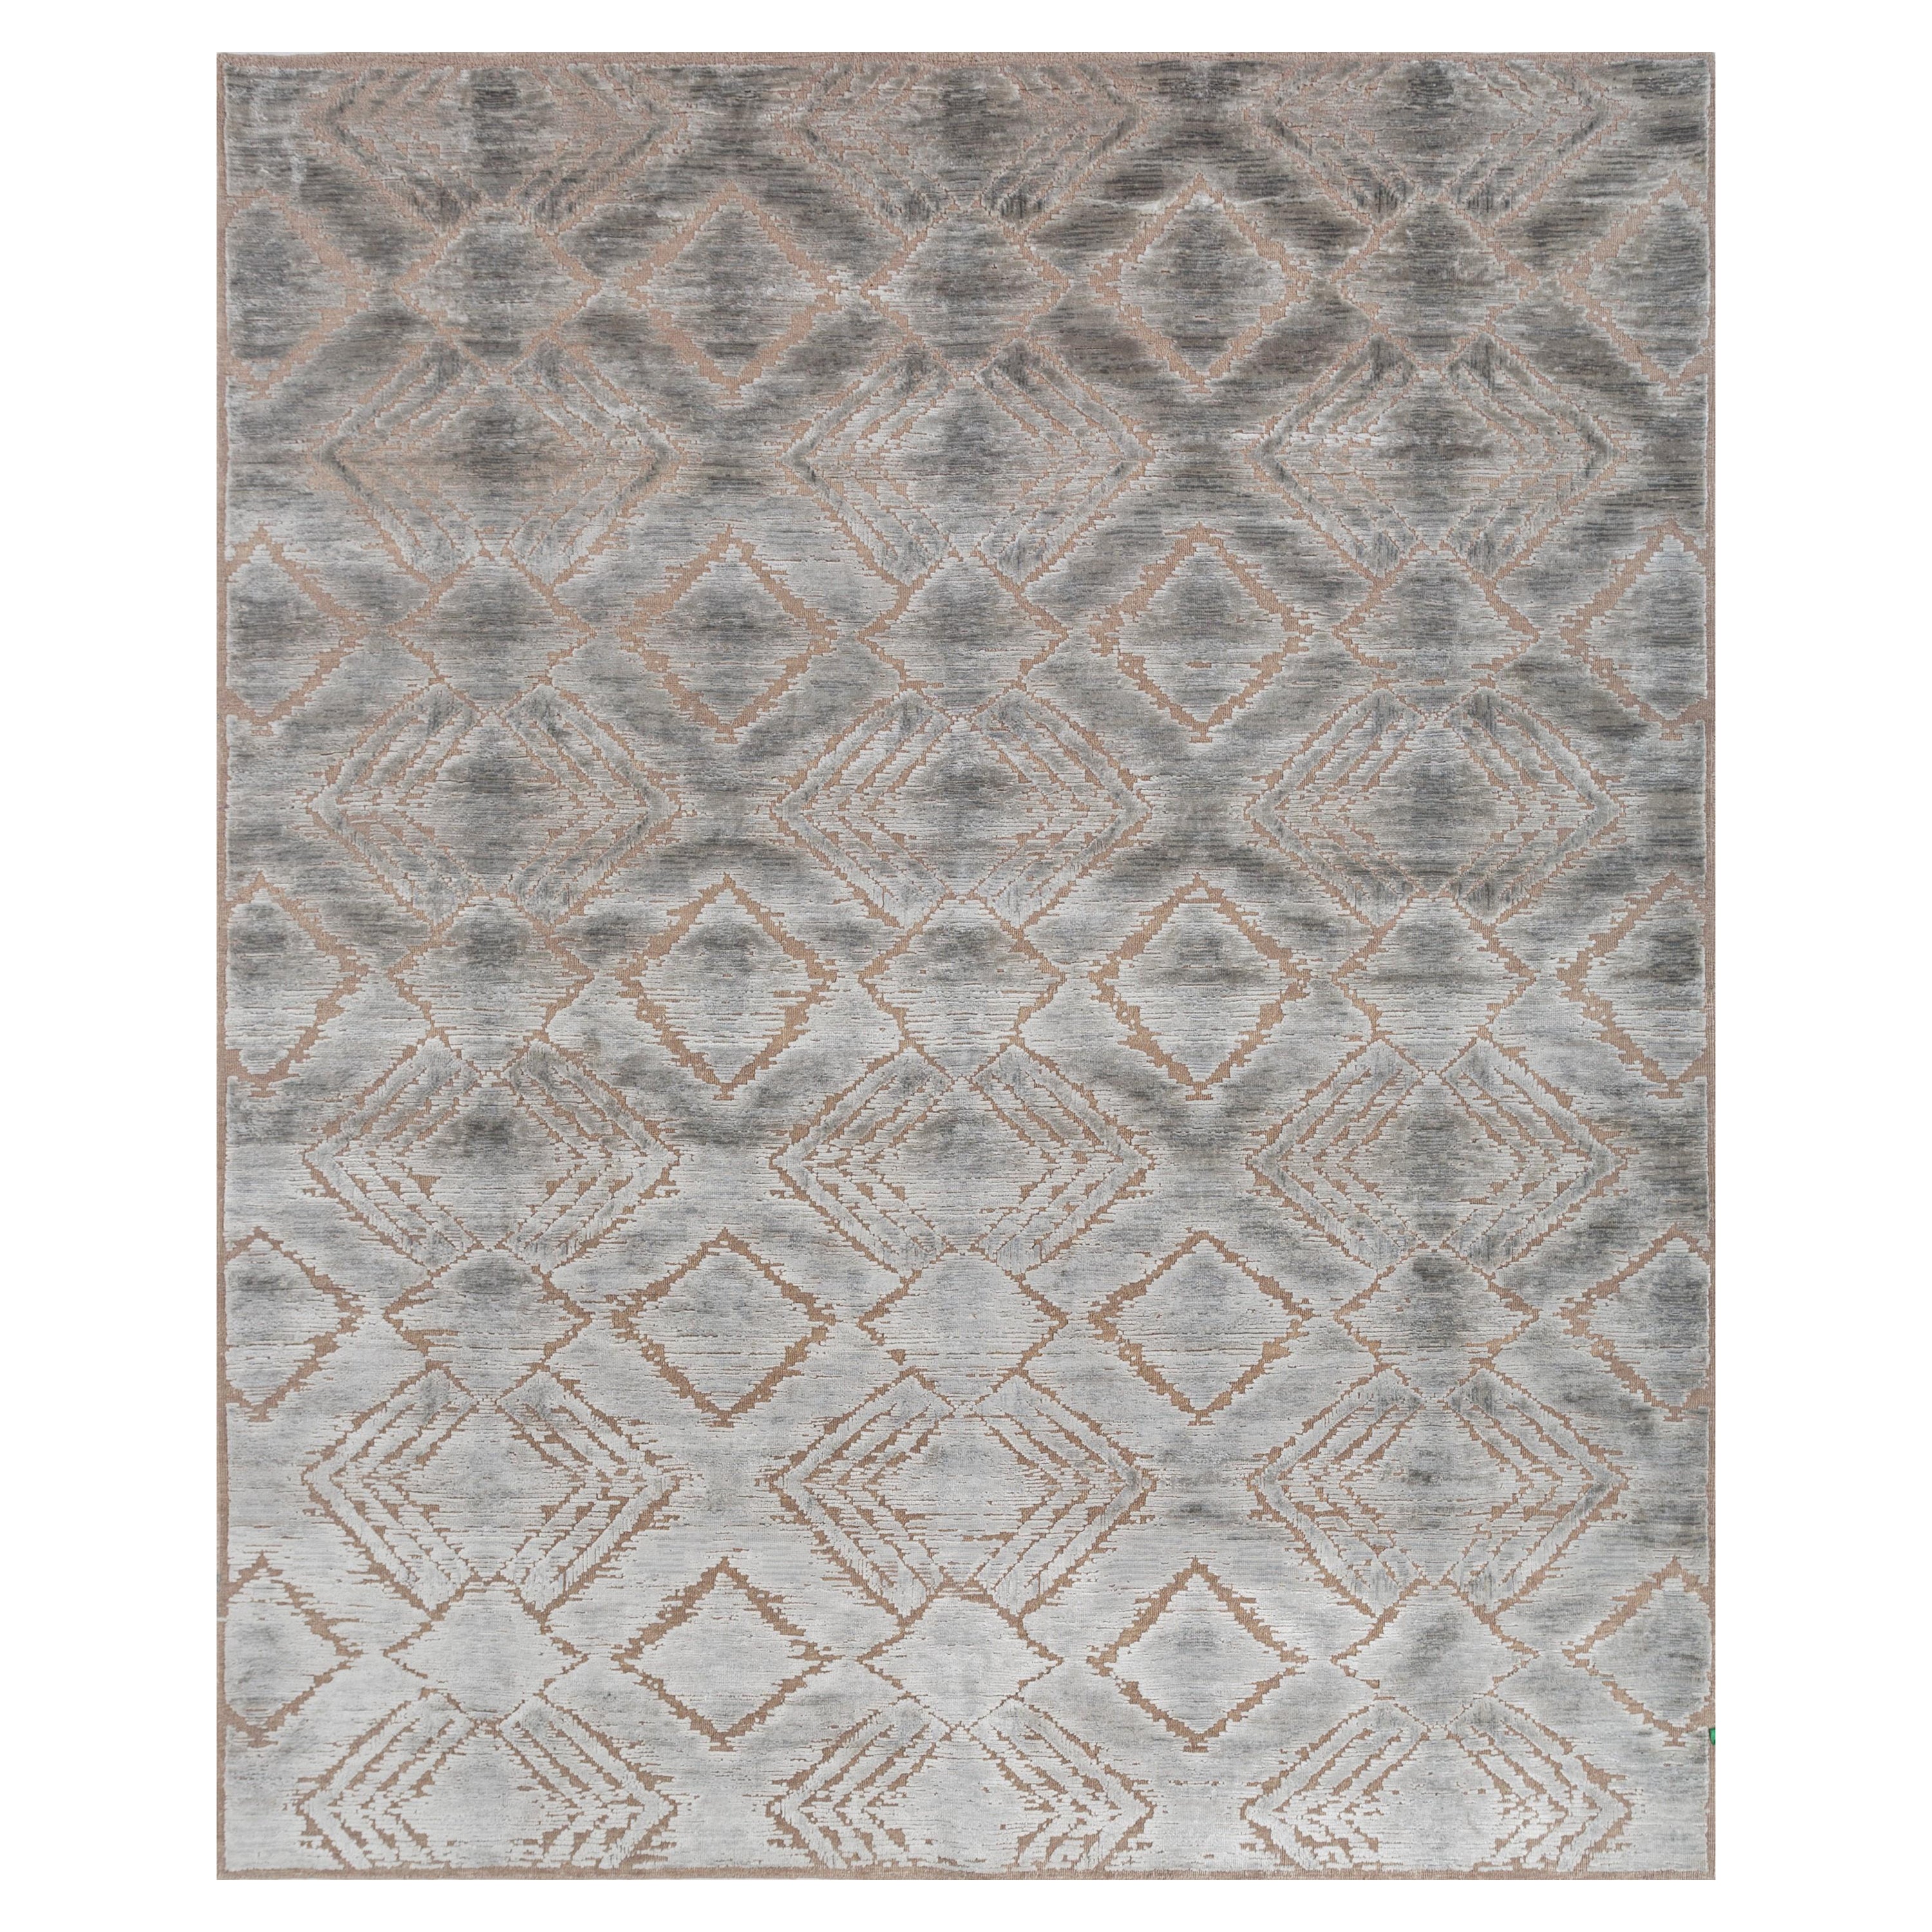 Delicate Balance Dark Ivory 240X300 cm Handknotted Rug For Sale